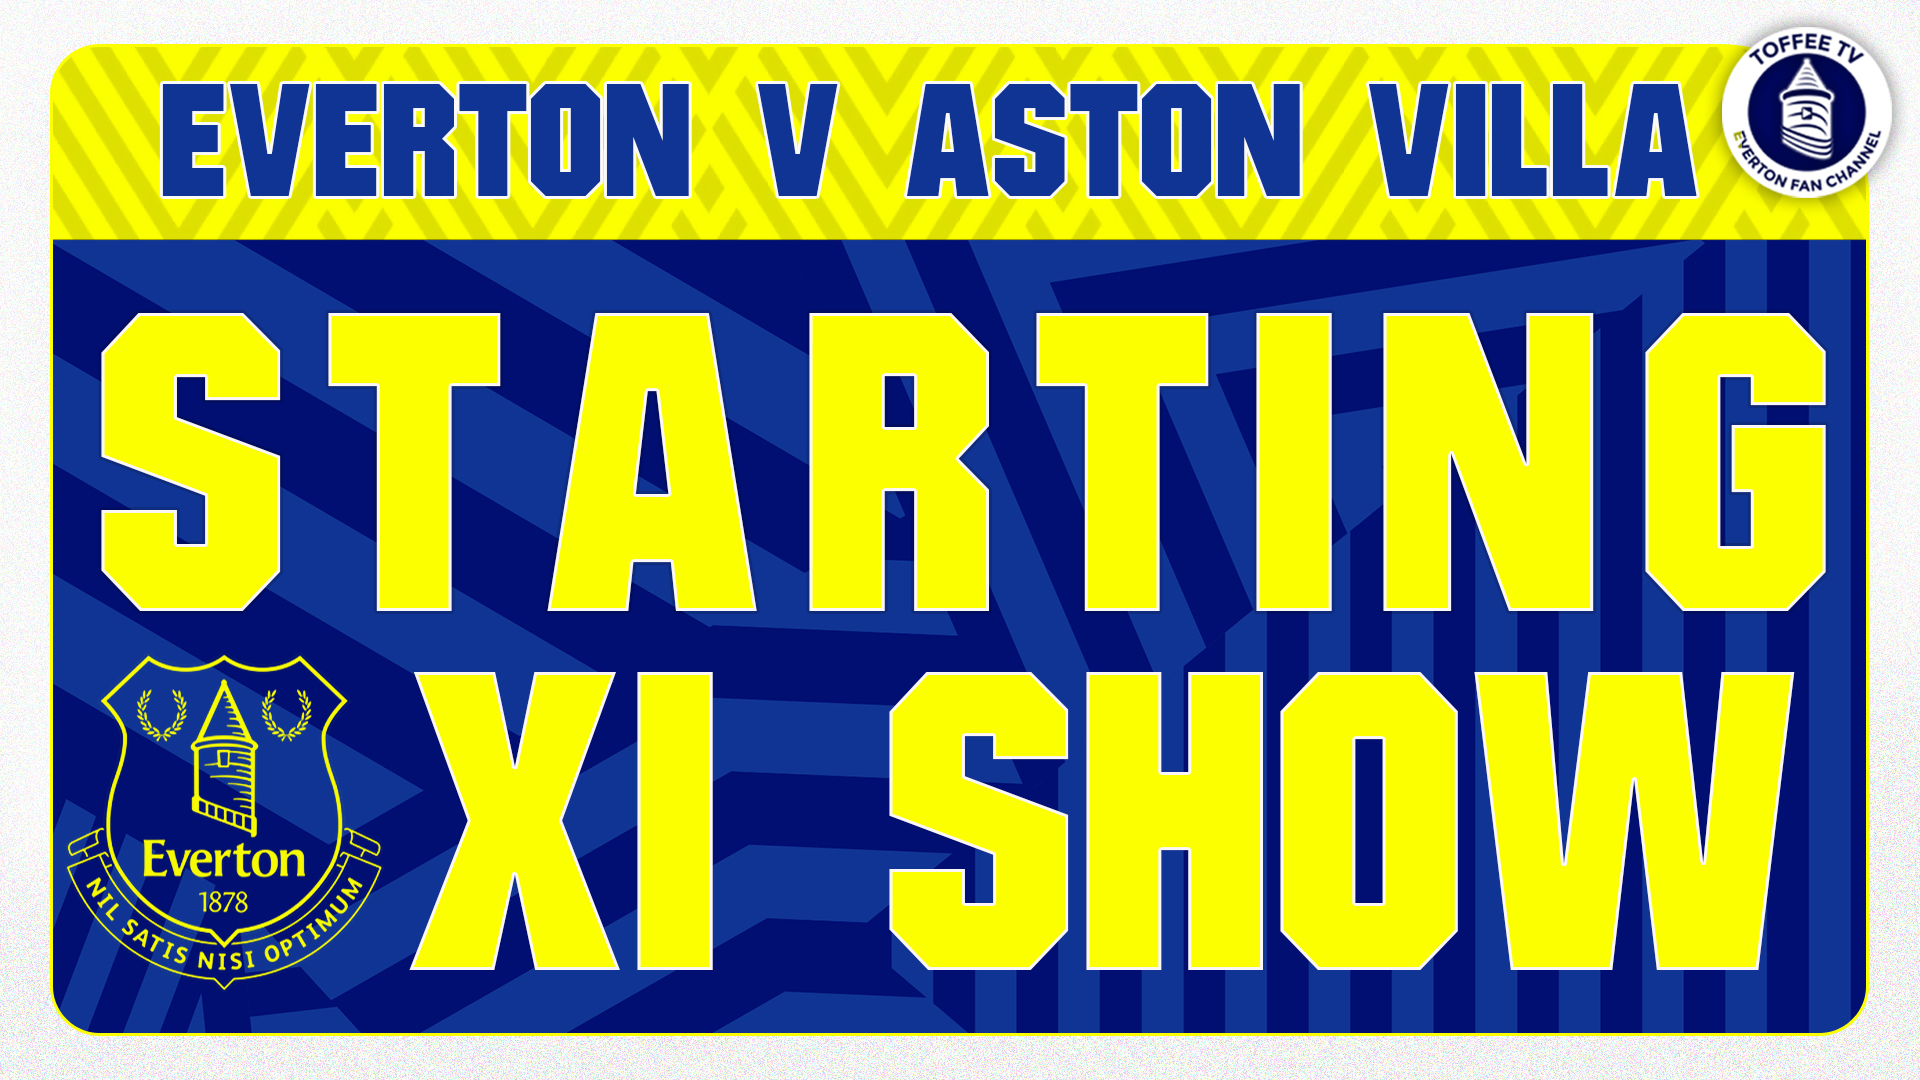 Featured image for “Everton V Aston Villa | Starting XI Show”